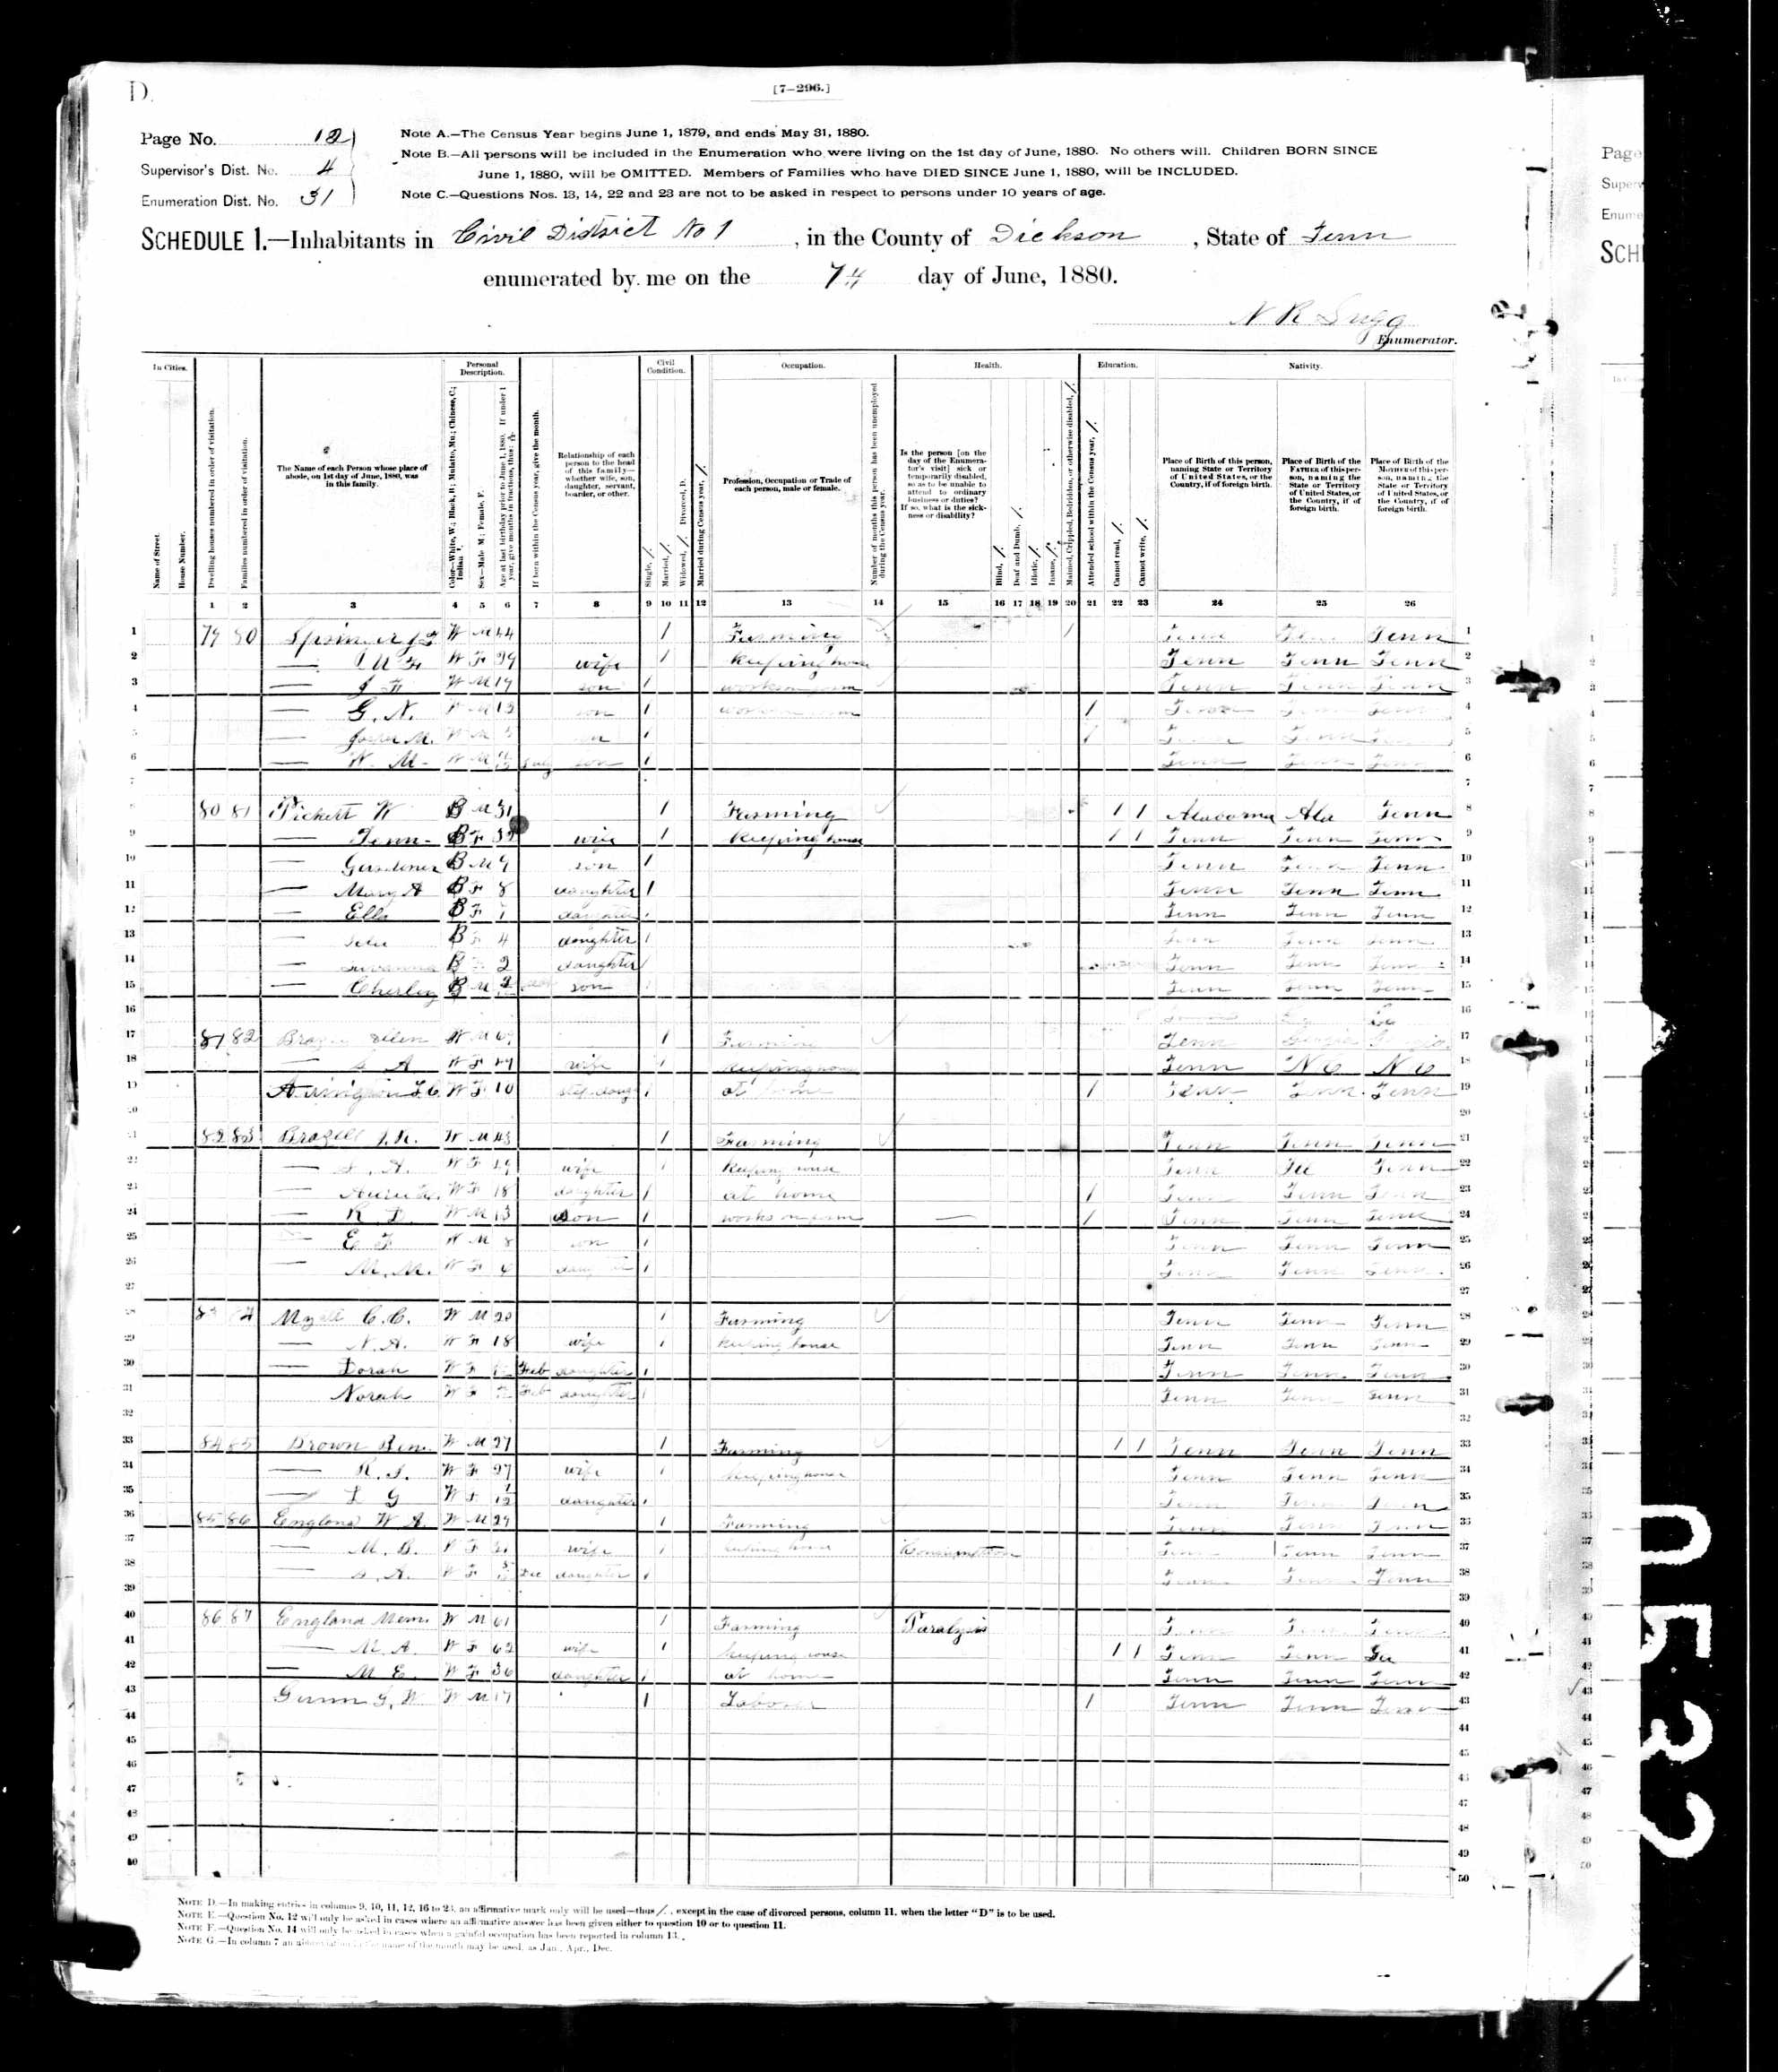 Allen Brazzell, 1880 Dickson County, Tennessee, census